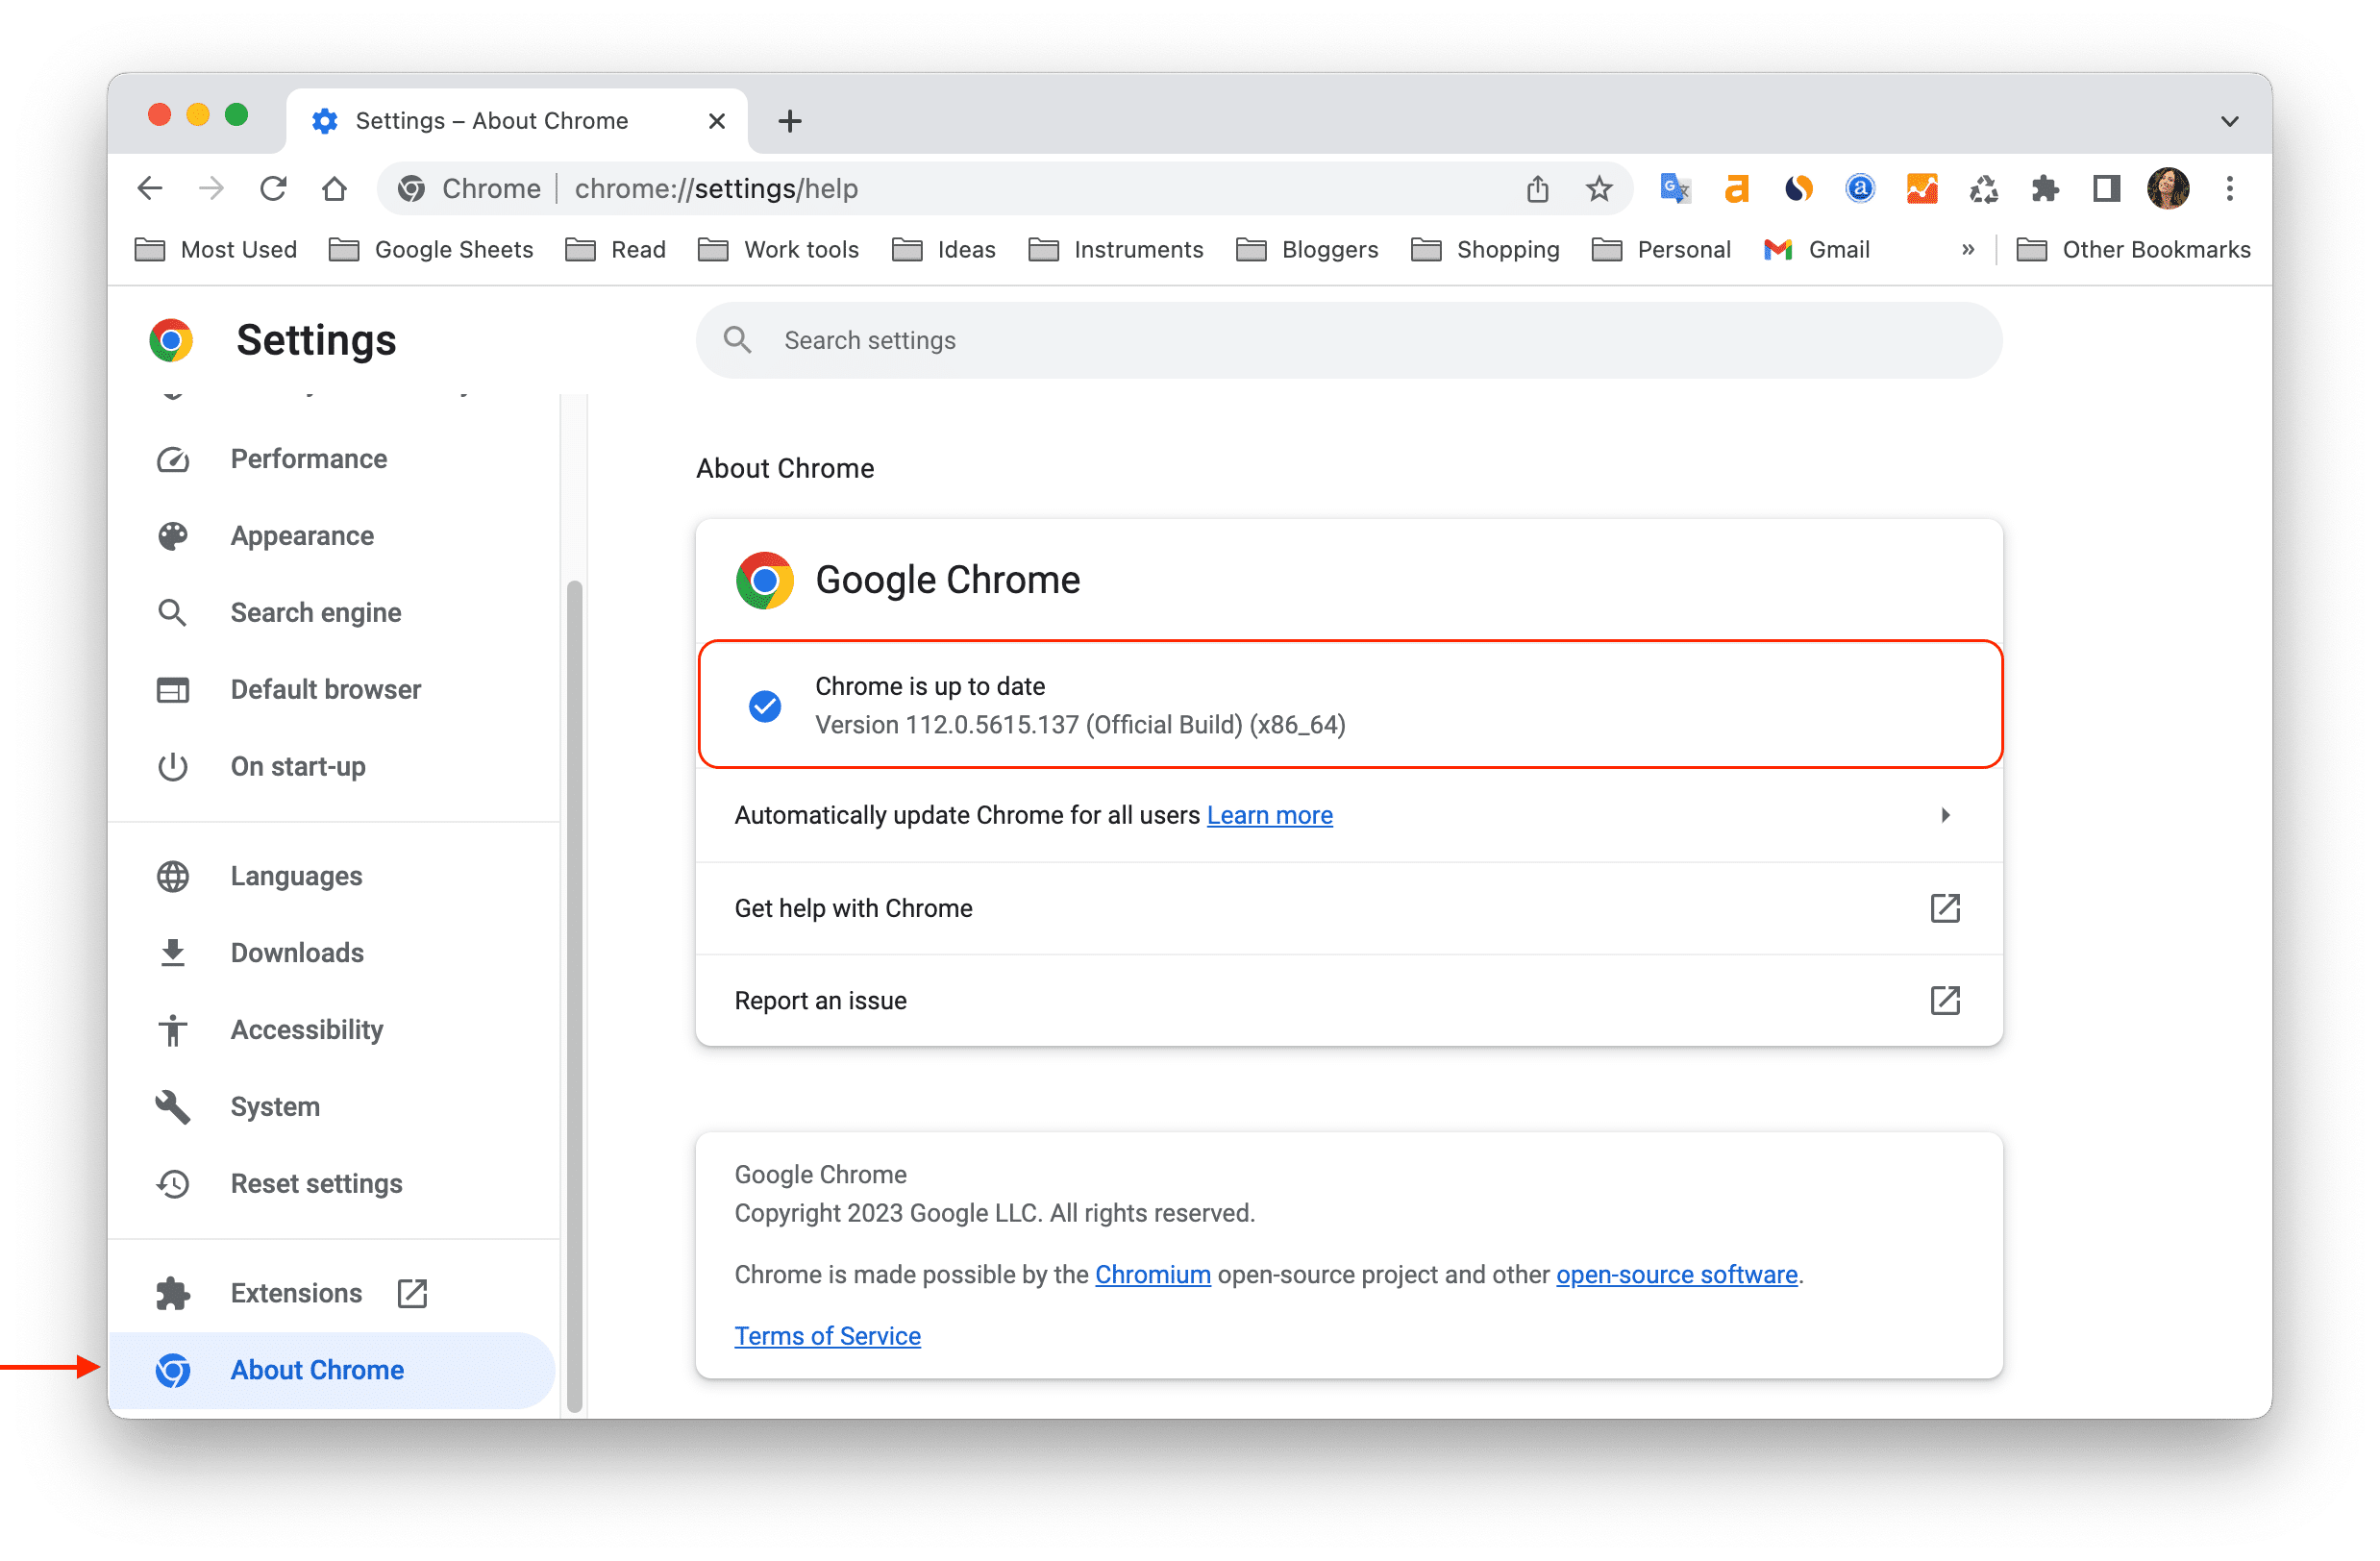 Chrome settings showing information about update